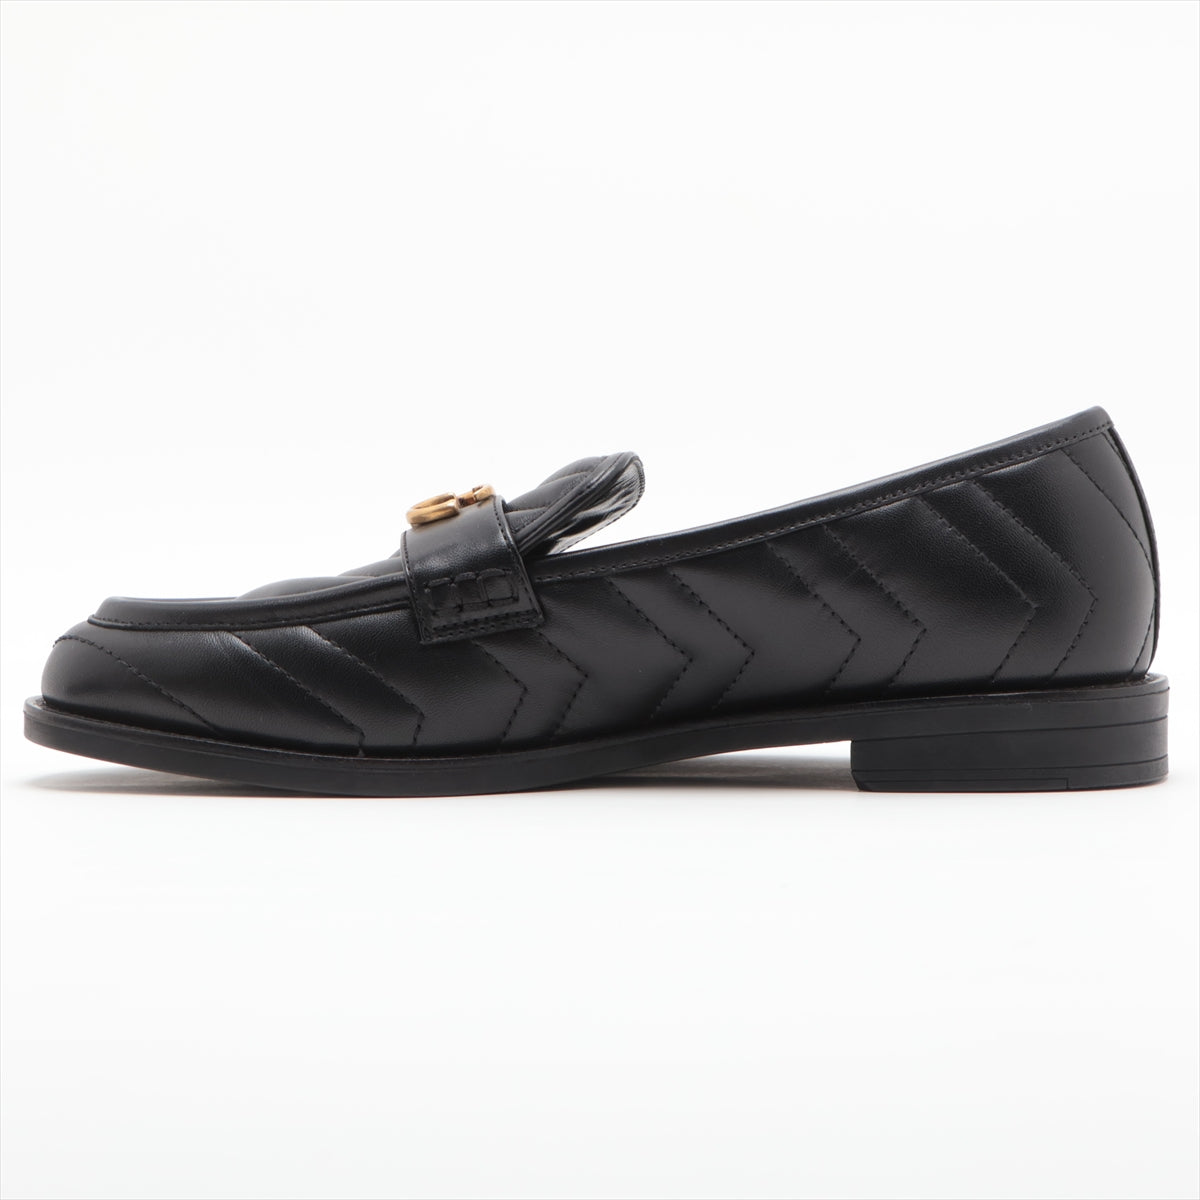 Gucci GG Marmont Leather Loafer 38 Ladies' Black 670399